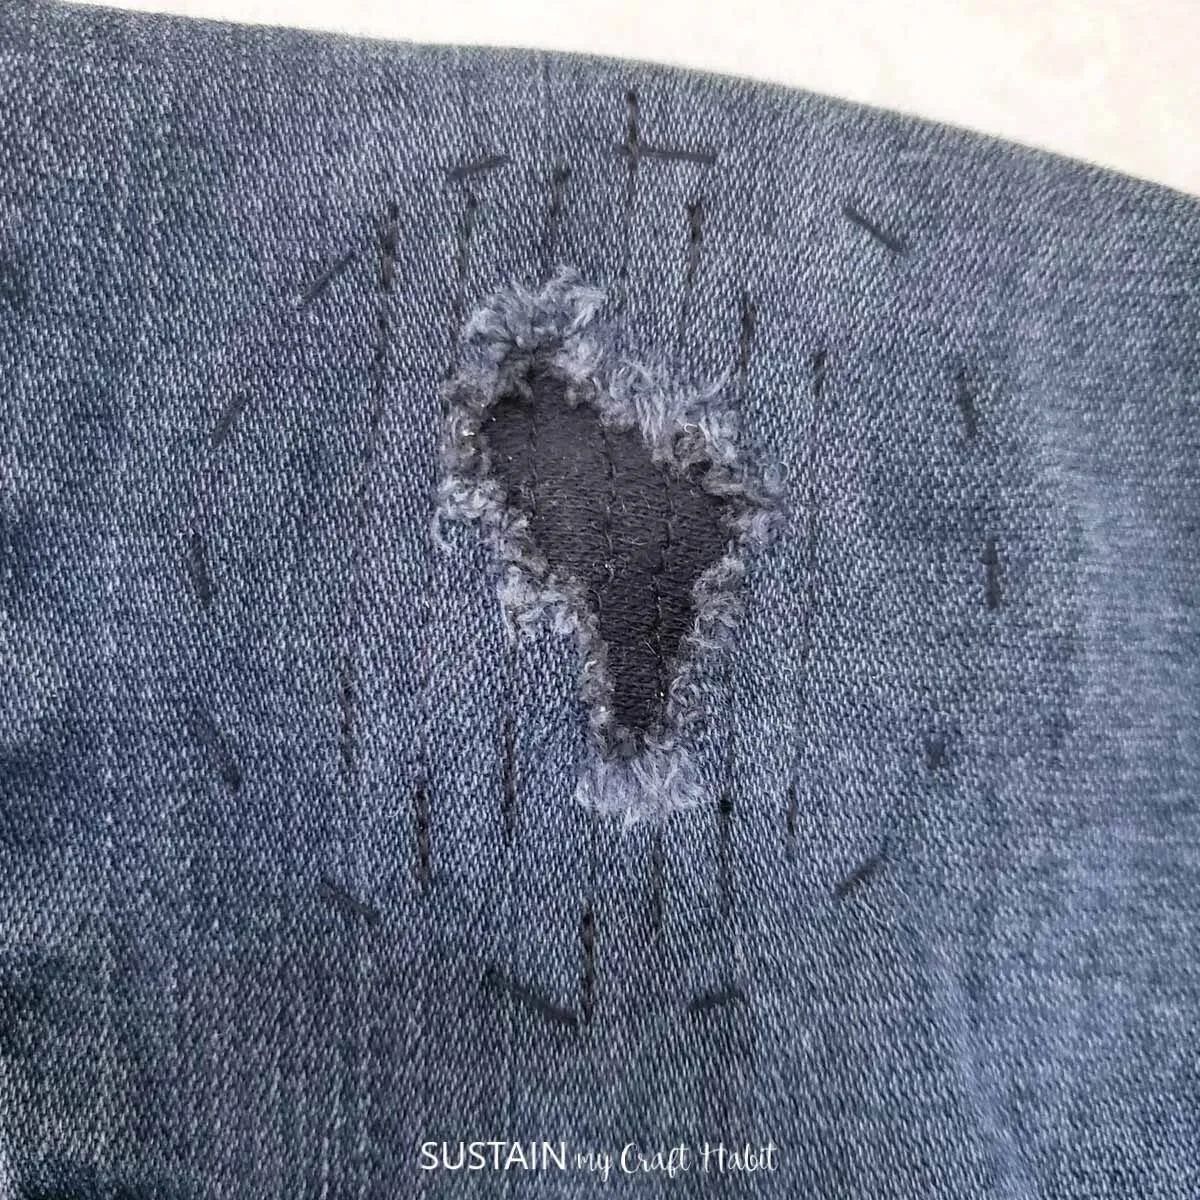 Sewed an iron-on patch over a hole to stop my wallet from falling out. Will  it be ok to wash/dry with the glue exposed inside the pocket since it's  over the hole?